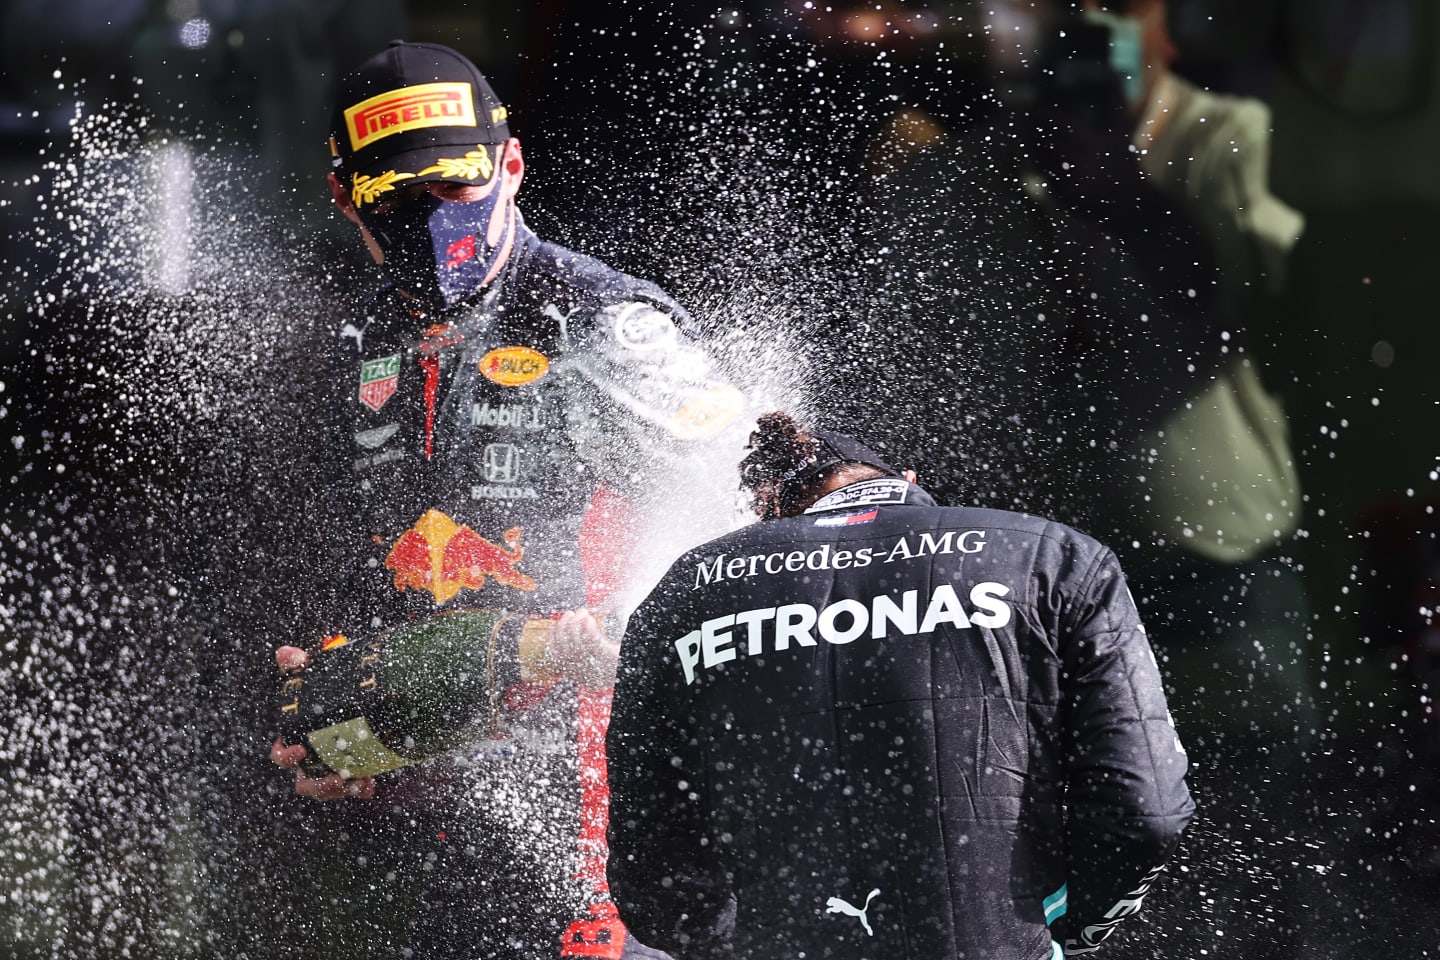 SPA, BELGIUM - AUGUST 30: Race winner Lewis Hamilton of Great Britain and Mercedes GP and Third placed Max Verstappen of Netherlands and Red Bull Racing celebrate on the podium during the F1 Grand Prix of Belgium at Circuit de Spa-Francorchamps on August 30, 2020 in Spa, Belgium. (Photo by Lars Baron/Getty Images)